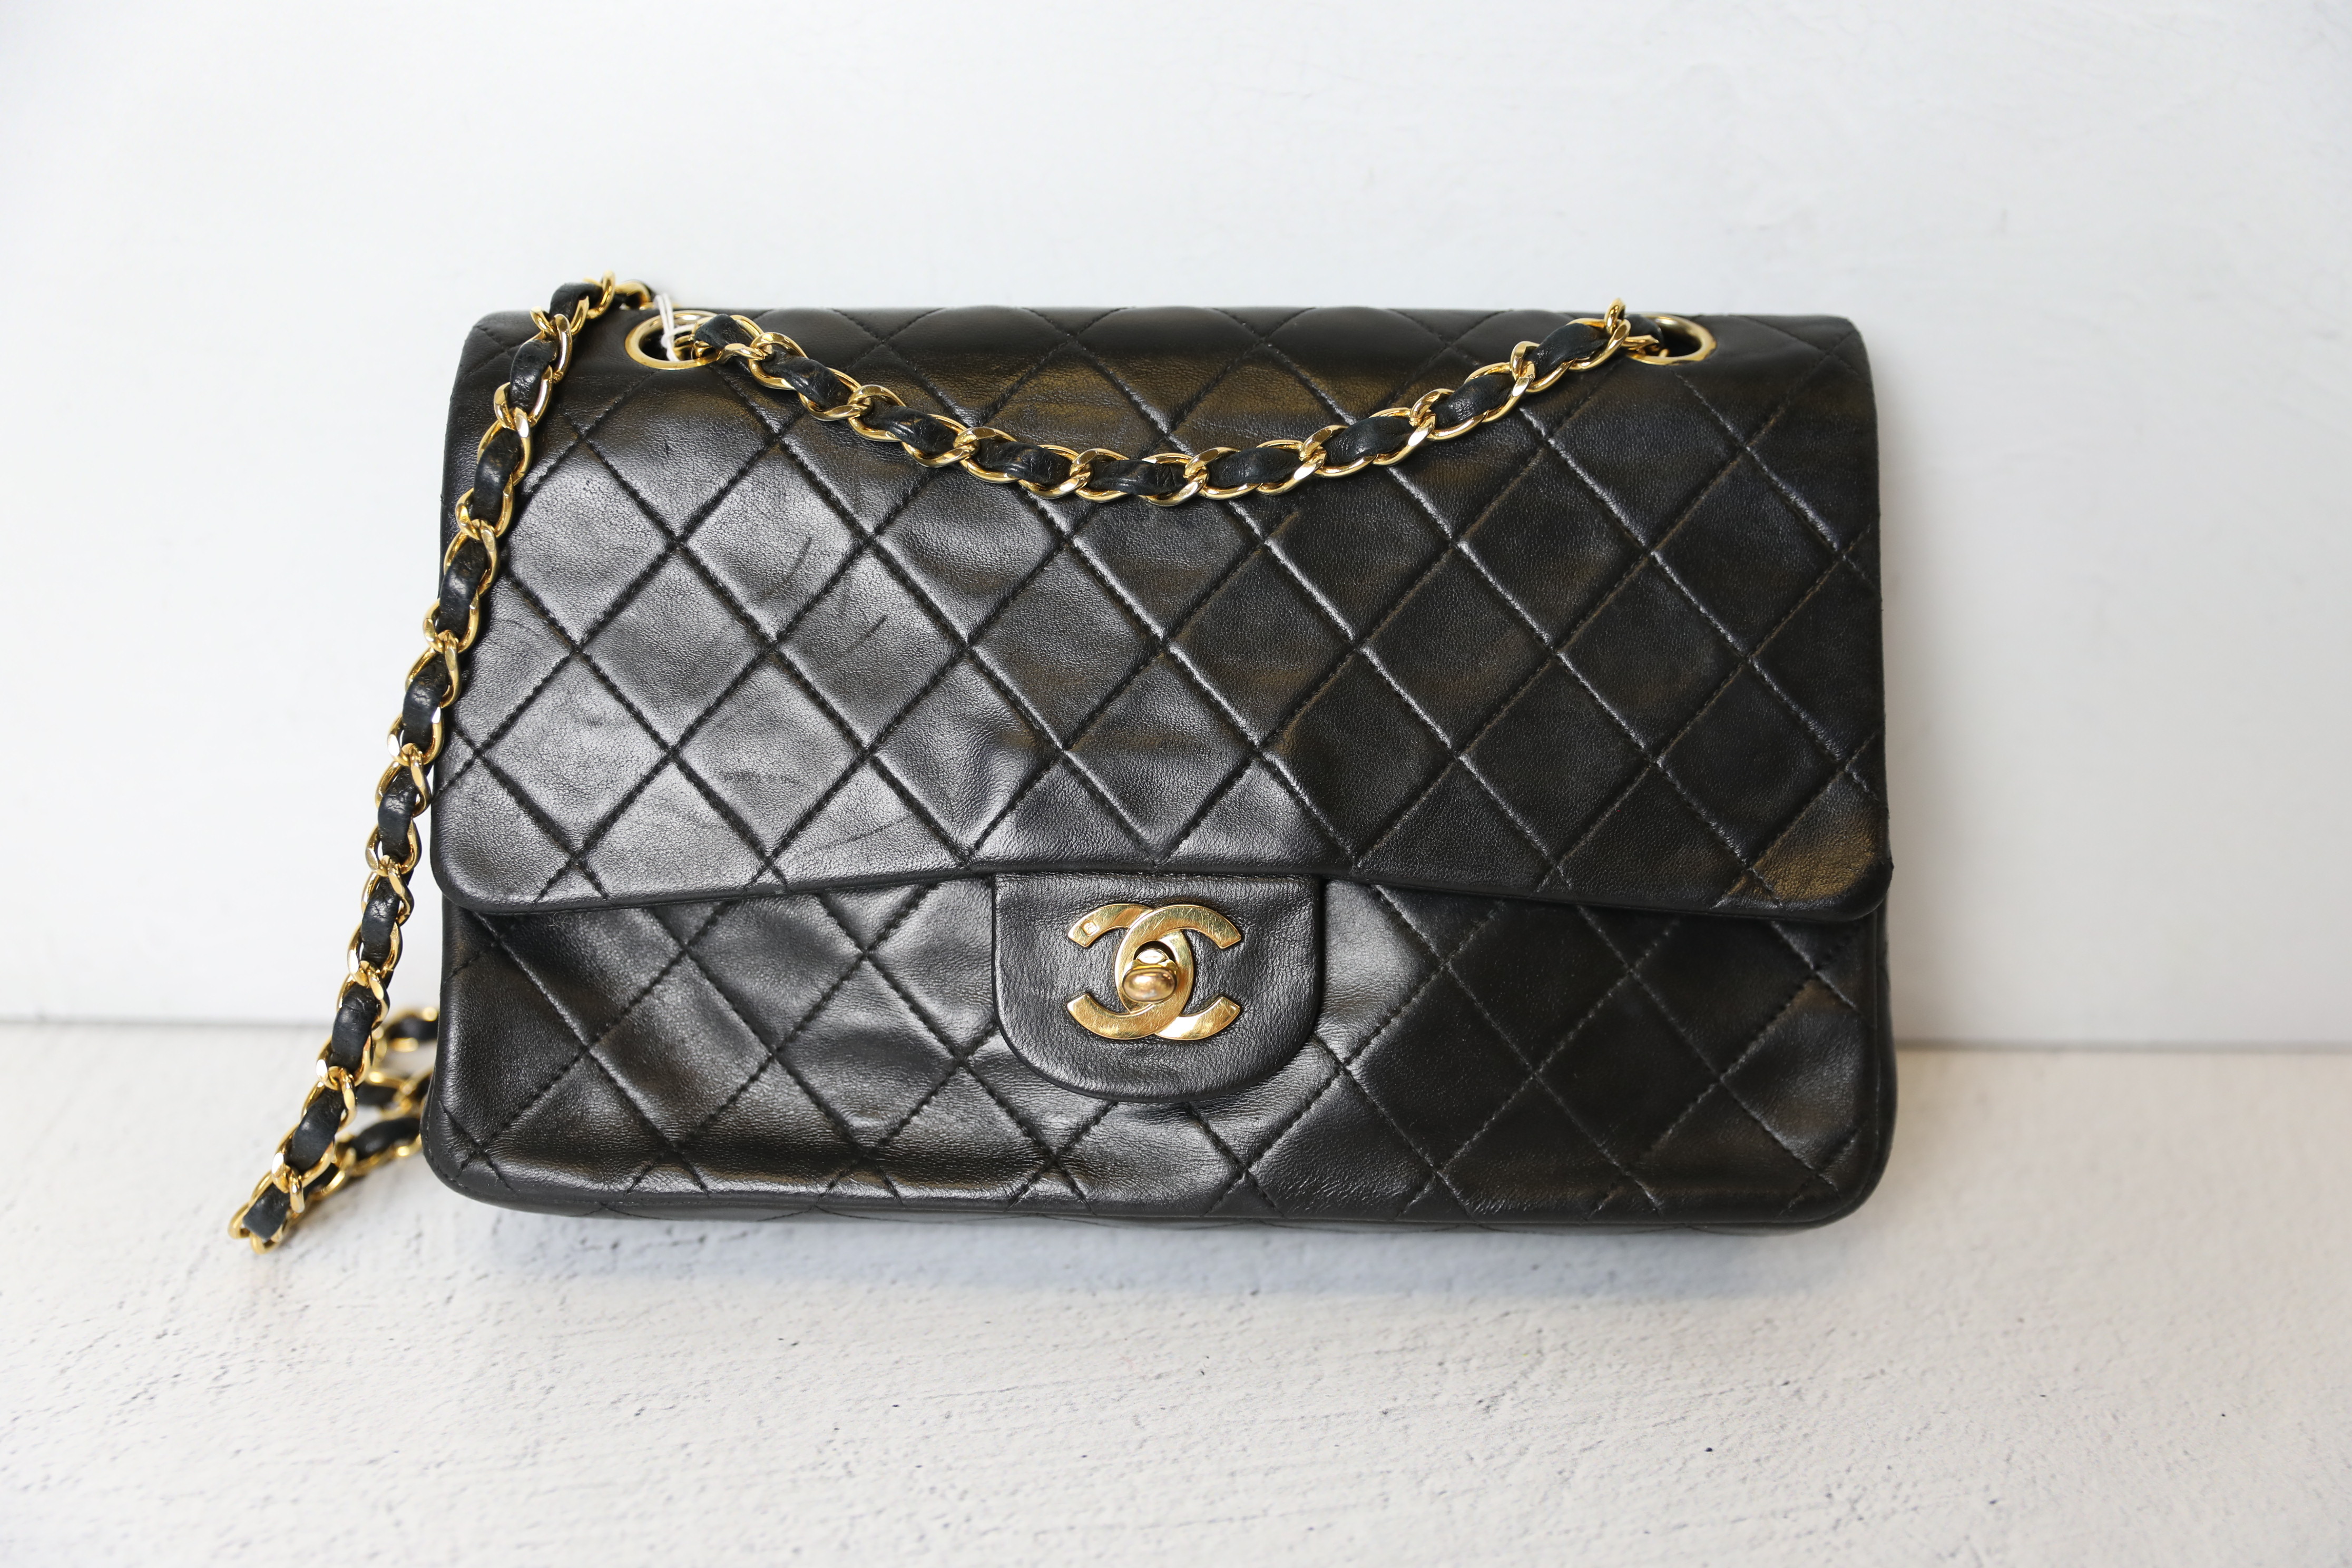 Chanel Classic Medium Flap, Pink Lambskin Leather, Silver Hardware,  Preowned in Dustbag MA001 - Julia Rose Boston